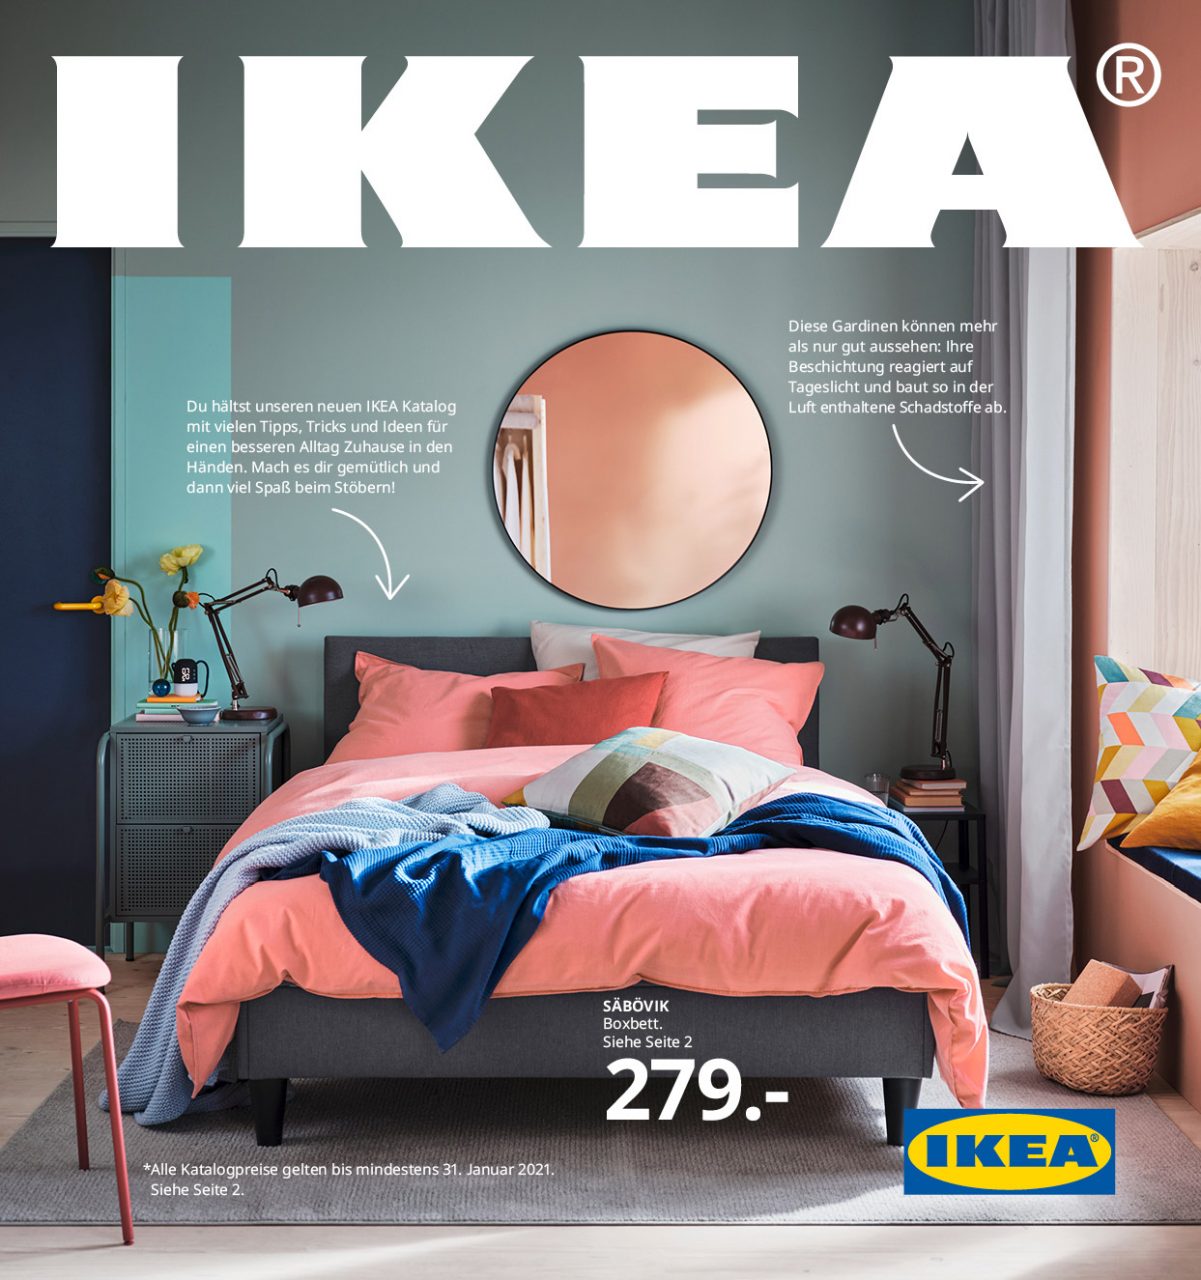 IKEA catalogue cover 2021 with image of bedroom and IKEA logo.